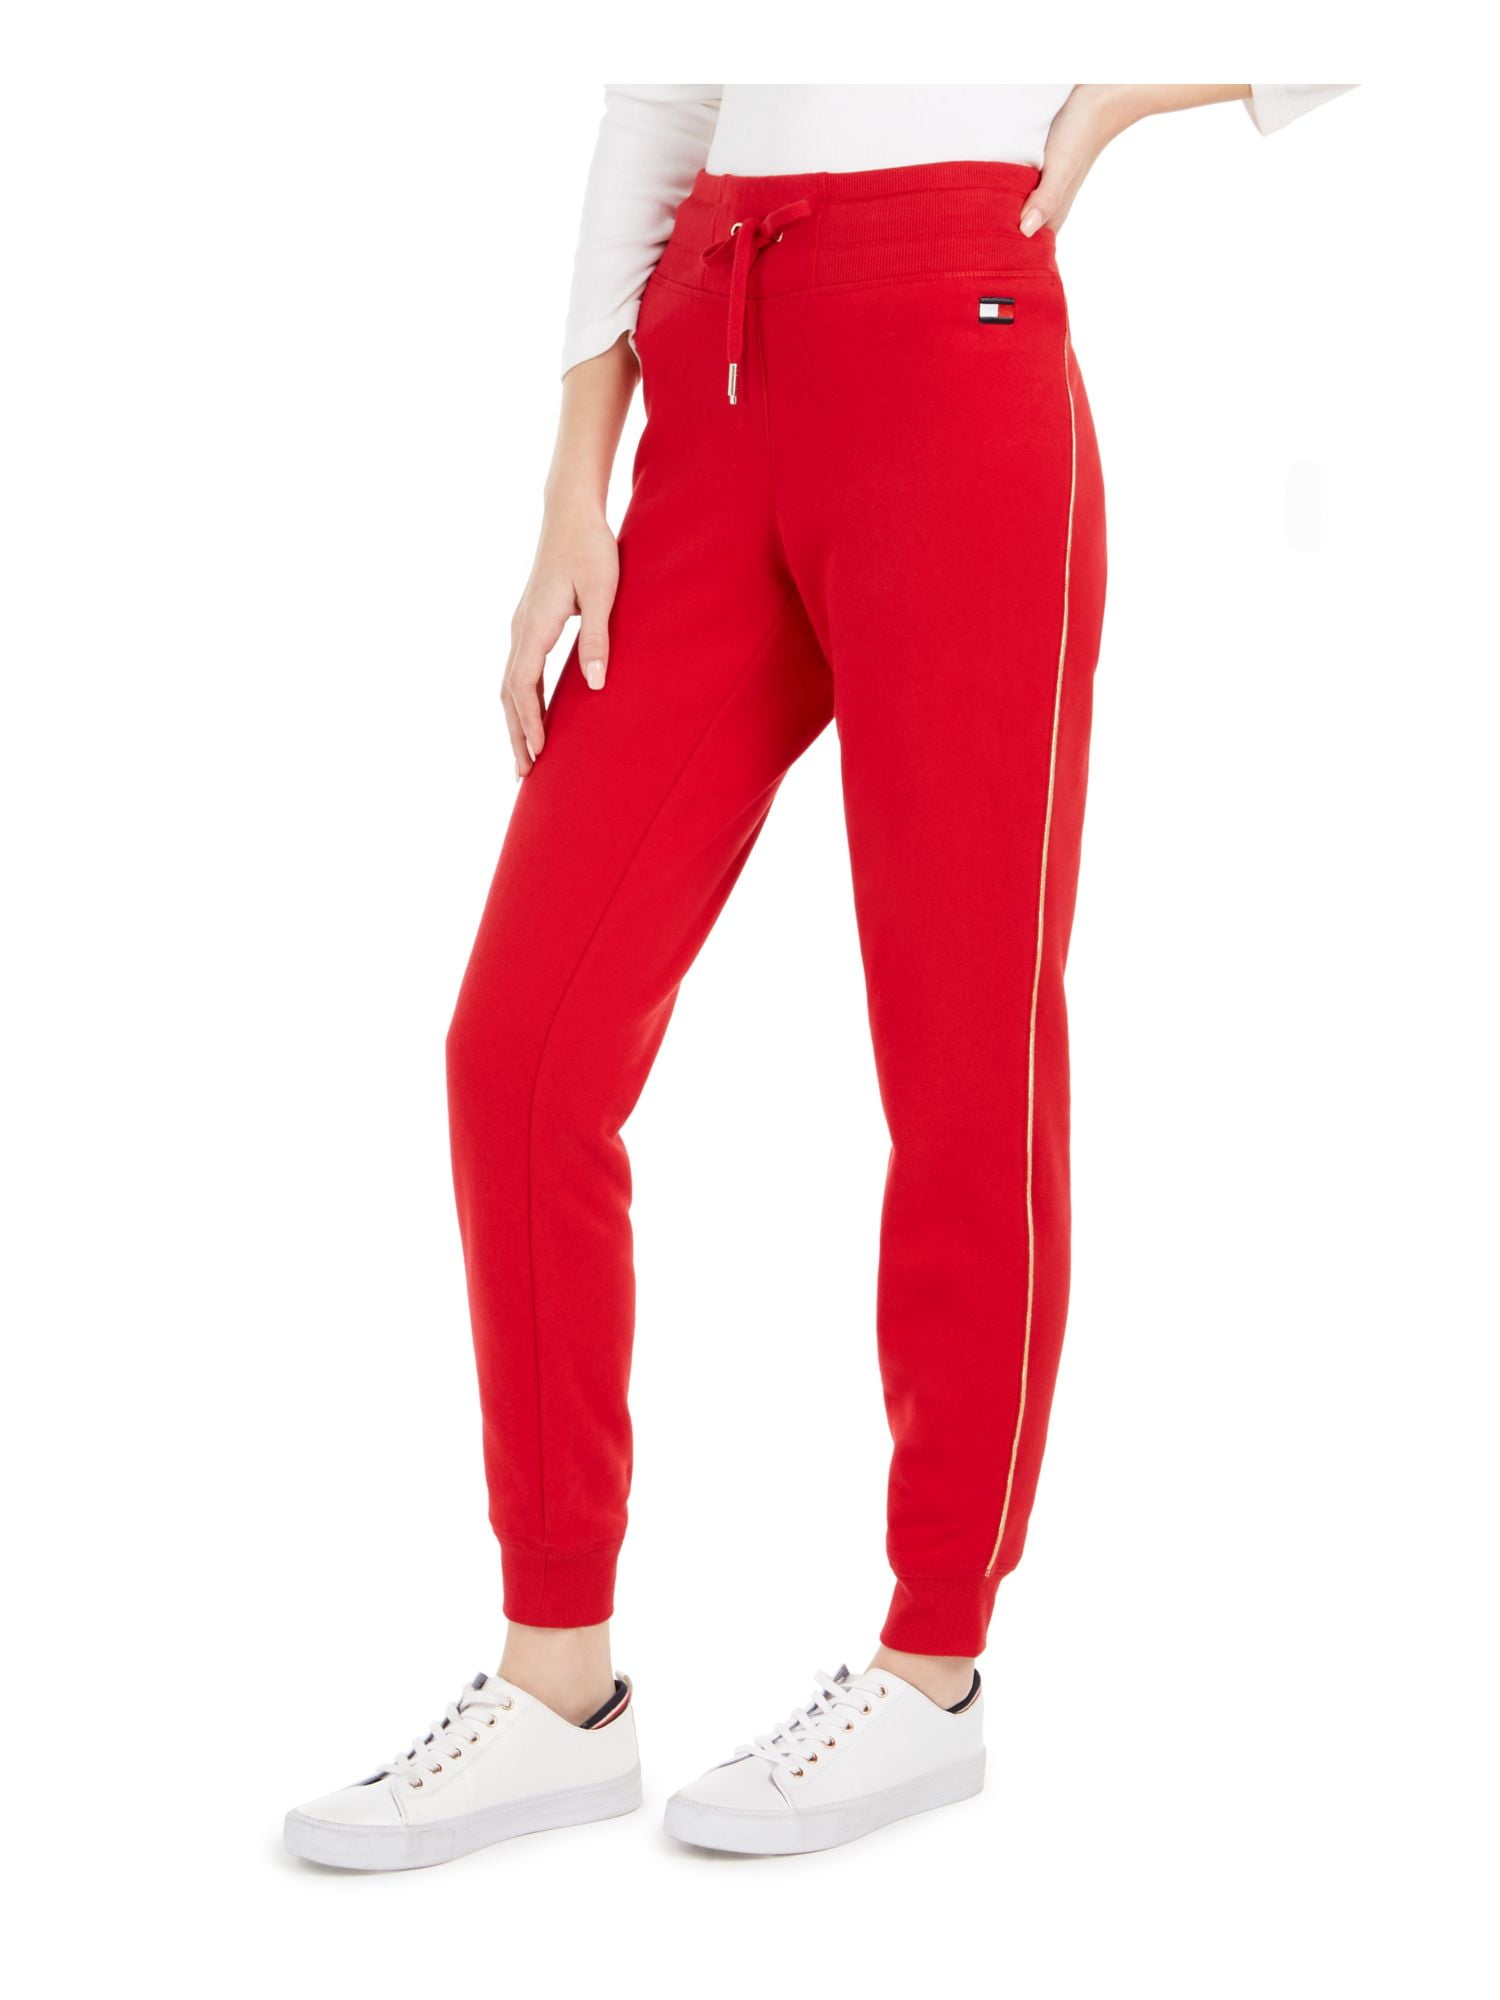 red tommy hilfiger pants